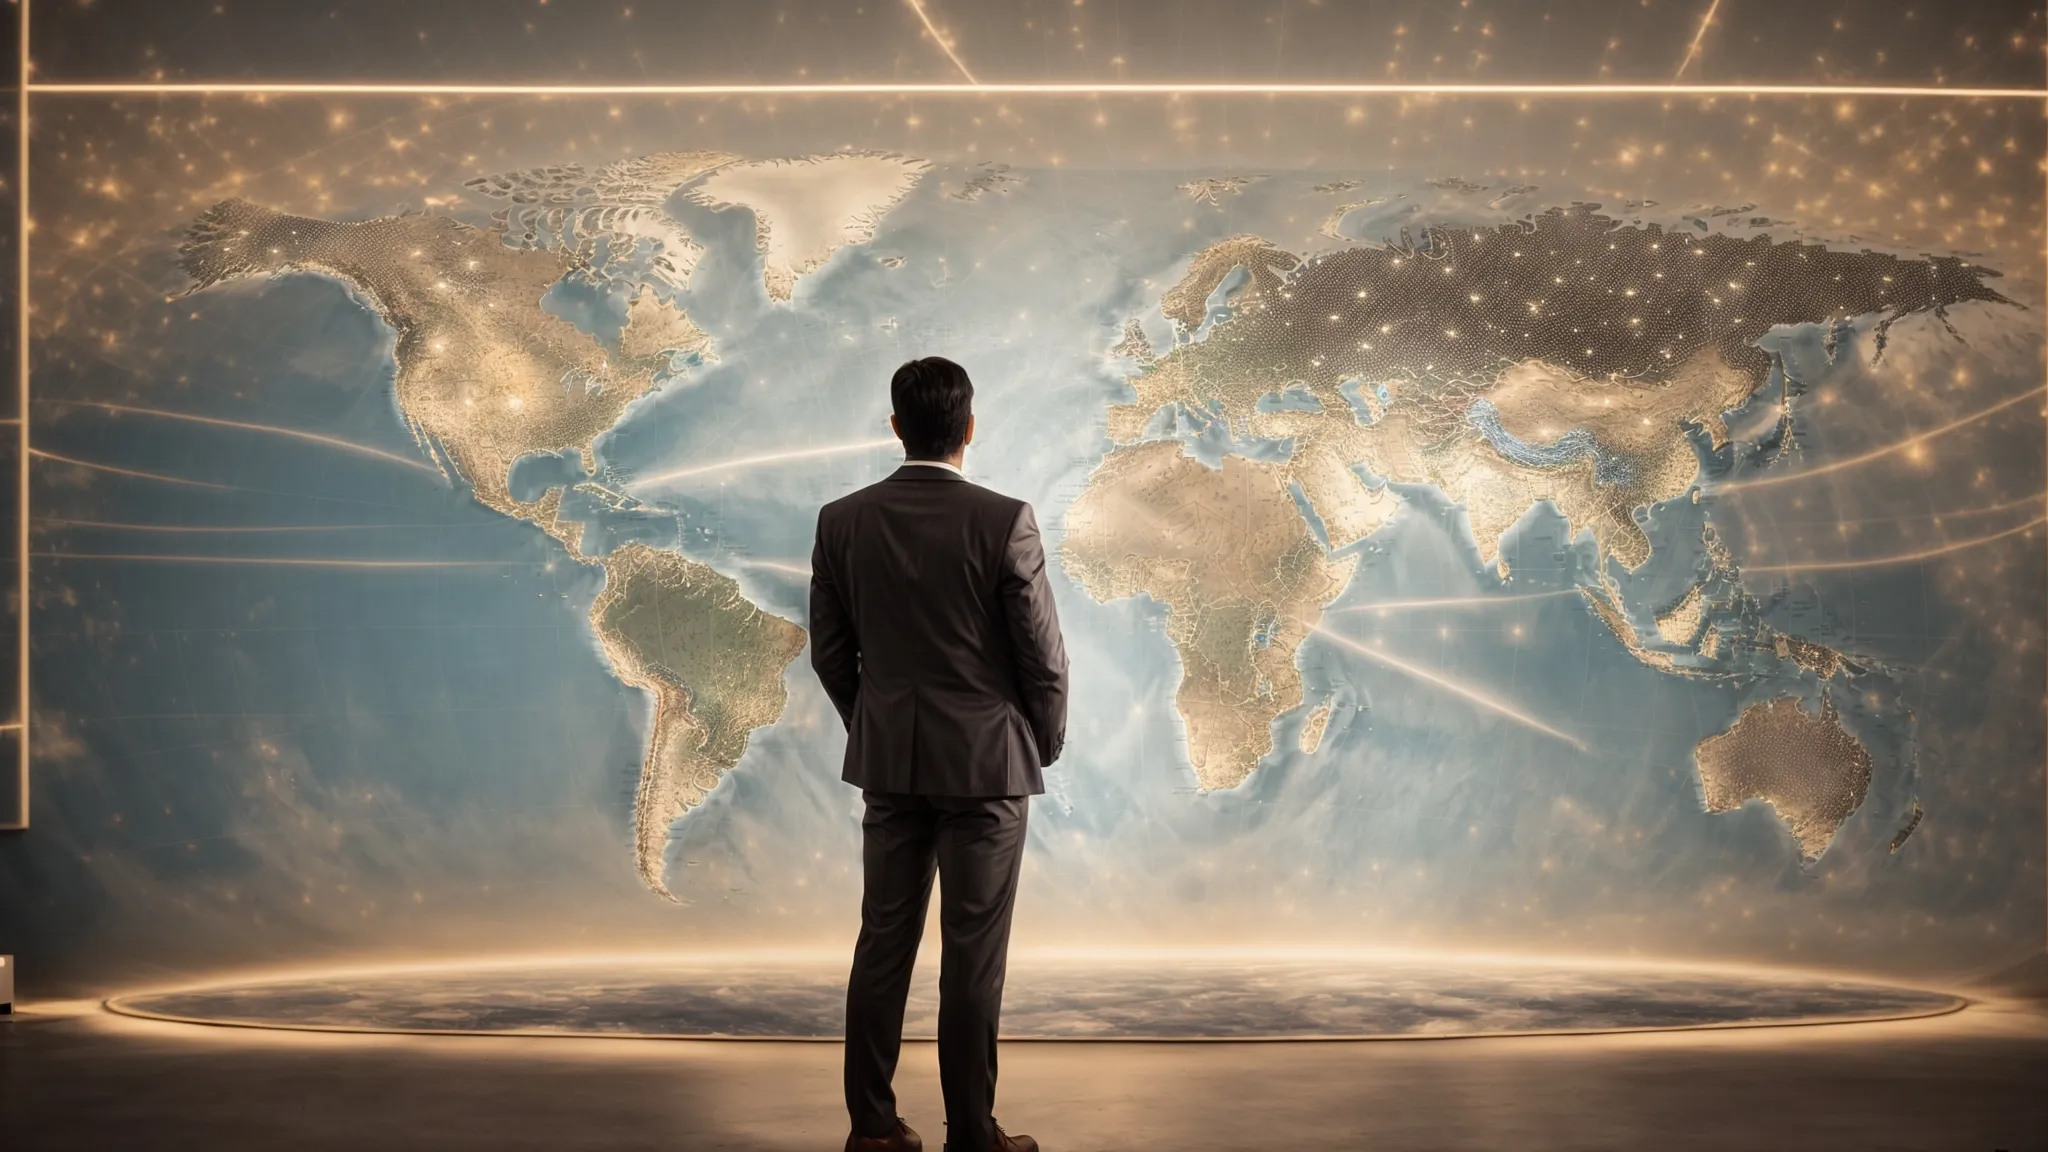 a marketer stands before a large world map, plotting points and connecting cultural symbols across continents.